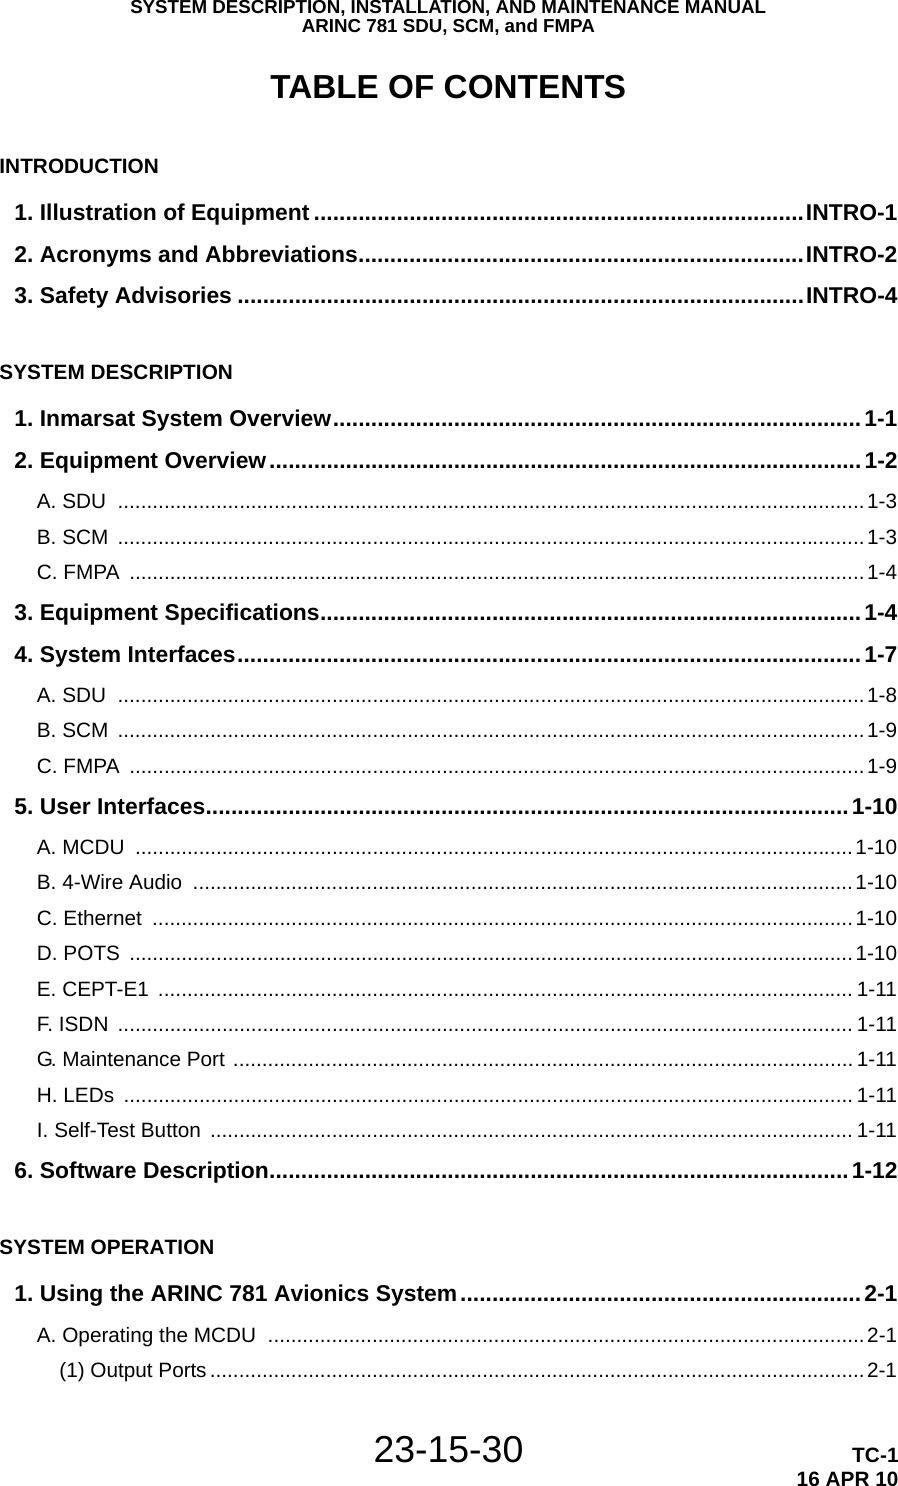 SYSTEM DESCRIPTION, INSTALLATION, AND MAINTENANCE MANUALARINC 781 SDU, SCM, and FMPA23-15-30 TC-116 APR 10TABLE OF CONTENTSINTRODUCTION1. Illustration of Equipment .............................................................................INTRO-12. Acronyms and Abbreviations......................................................................INTRO-23. Safety Advisories .........................................................................................INTRO-4SYSTEM DESCRIPTION1. Inmarsat System Overview...................................................................................1-12. Equipment Overview.............................................................................................1-2A. SDU  .................................................................................................................................1-3B. SCM  .................................................................................................................................1-3C. FMPA  ...............................................................................................................................1-43. Equipment Specifications.....................................................................................1-44. System Interfaces..................................................................................................1-7A. SDU  .................................................................................................................................1-8B. SCM  .................................................................................................................................1-9C. FMPA  ...............................................................................................................................1-95. User Interfaces.....................................................................................................1-10A. MCDU  ............................................................................................................................1-10B. 4-Wire Audio  ..................................................................................................................1-10C. Ethernet  .........................................................................................................................1-10D. POTS  .............................................................................................................................1-10E. CEPT-E1  ........................................................................................................................ 1-11F. ISDN  ............................................................................................................................... 1-11G. Maintenance Port ........................................................................................................... 1-11H. LEDs  .............................................................................................................................. 1-11I. Self-Test Button  ............................................................................................................... 1-116. Software Description...........................................................................................1-12SYSTEM OPERATION1. Using the ARINC 781 Avionics System...............................................................2-1A. Operating the MCDU  .......................................................................................................2-1(1) Output Ports.................................................................................................................2-1